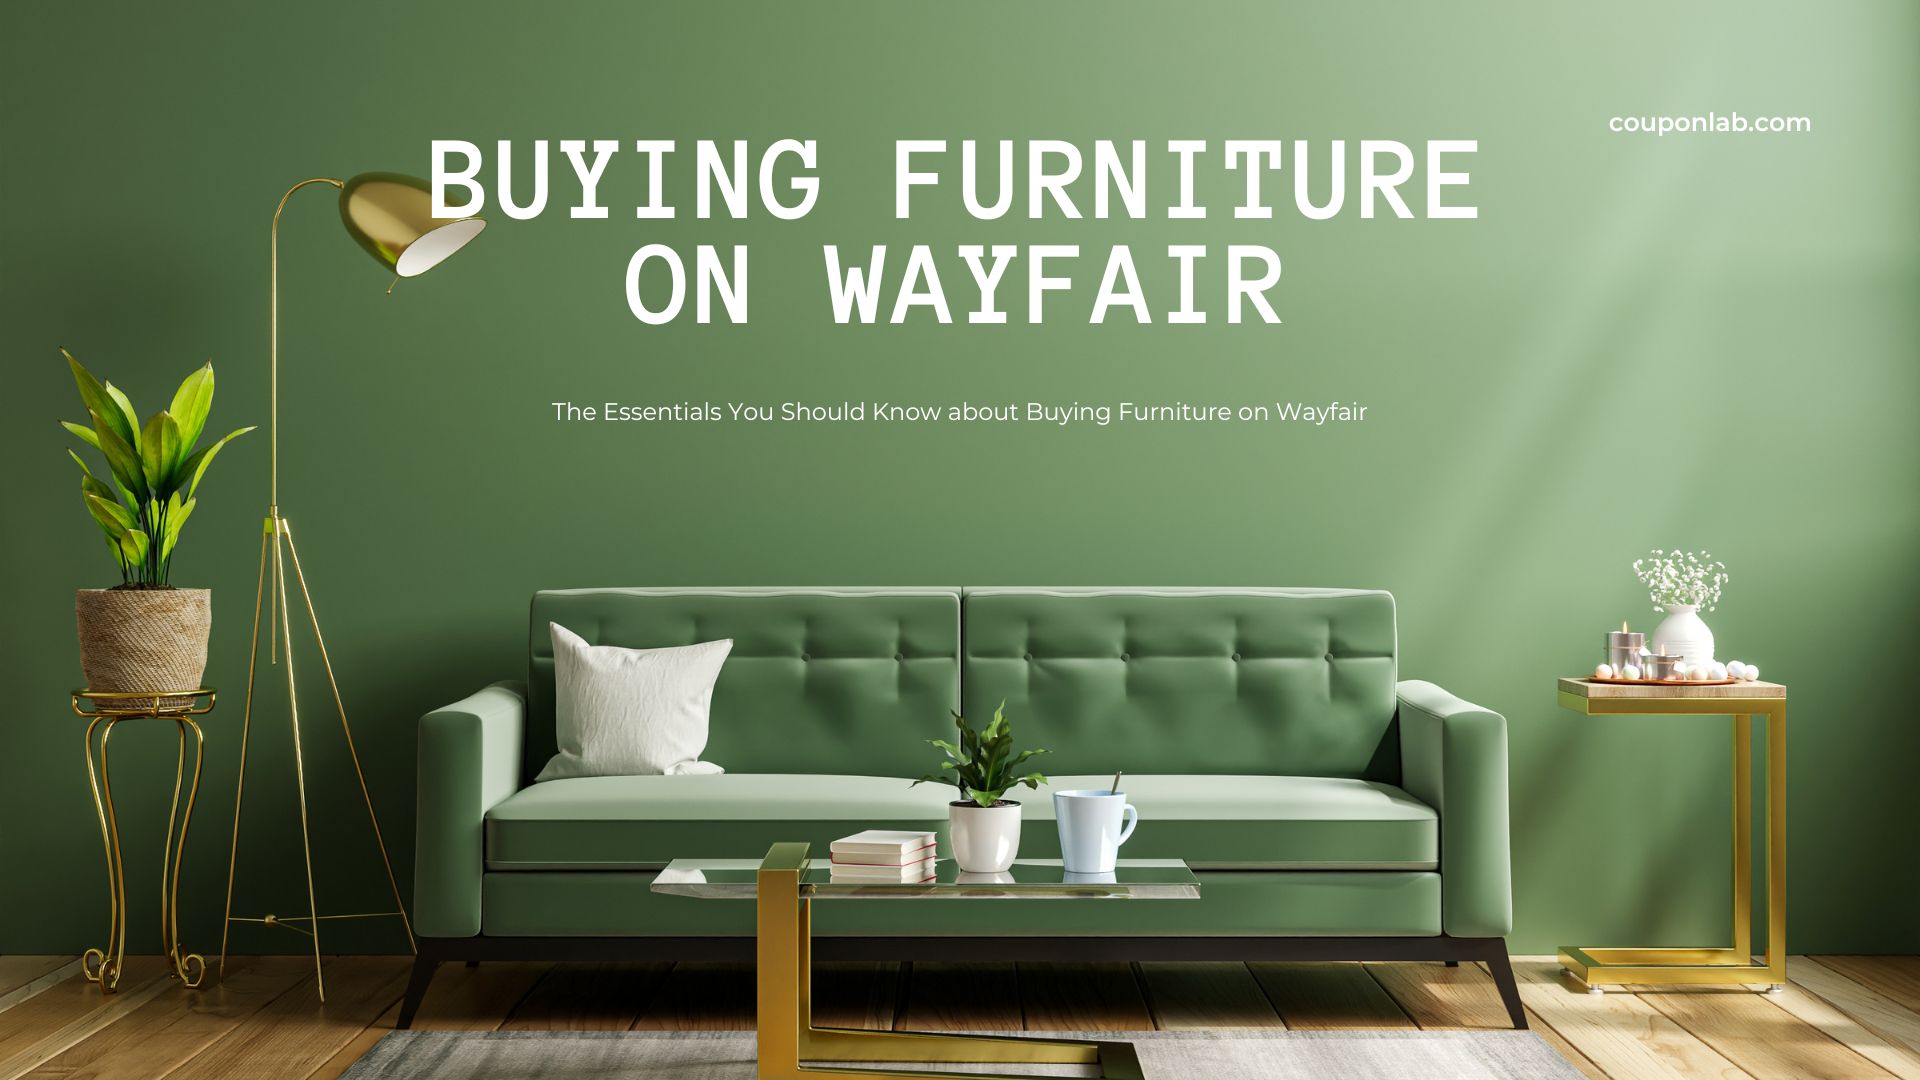 The Essentials You Should Know about Buying Furniture on Wayfair